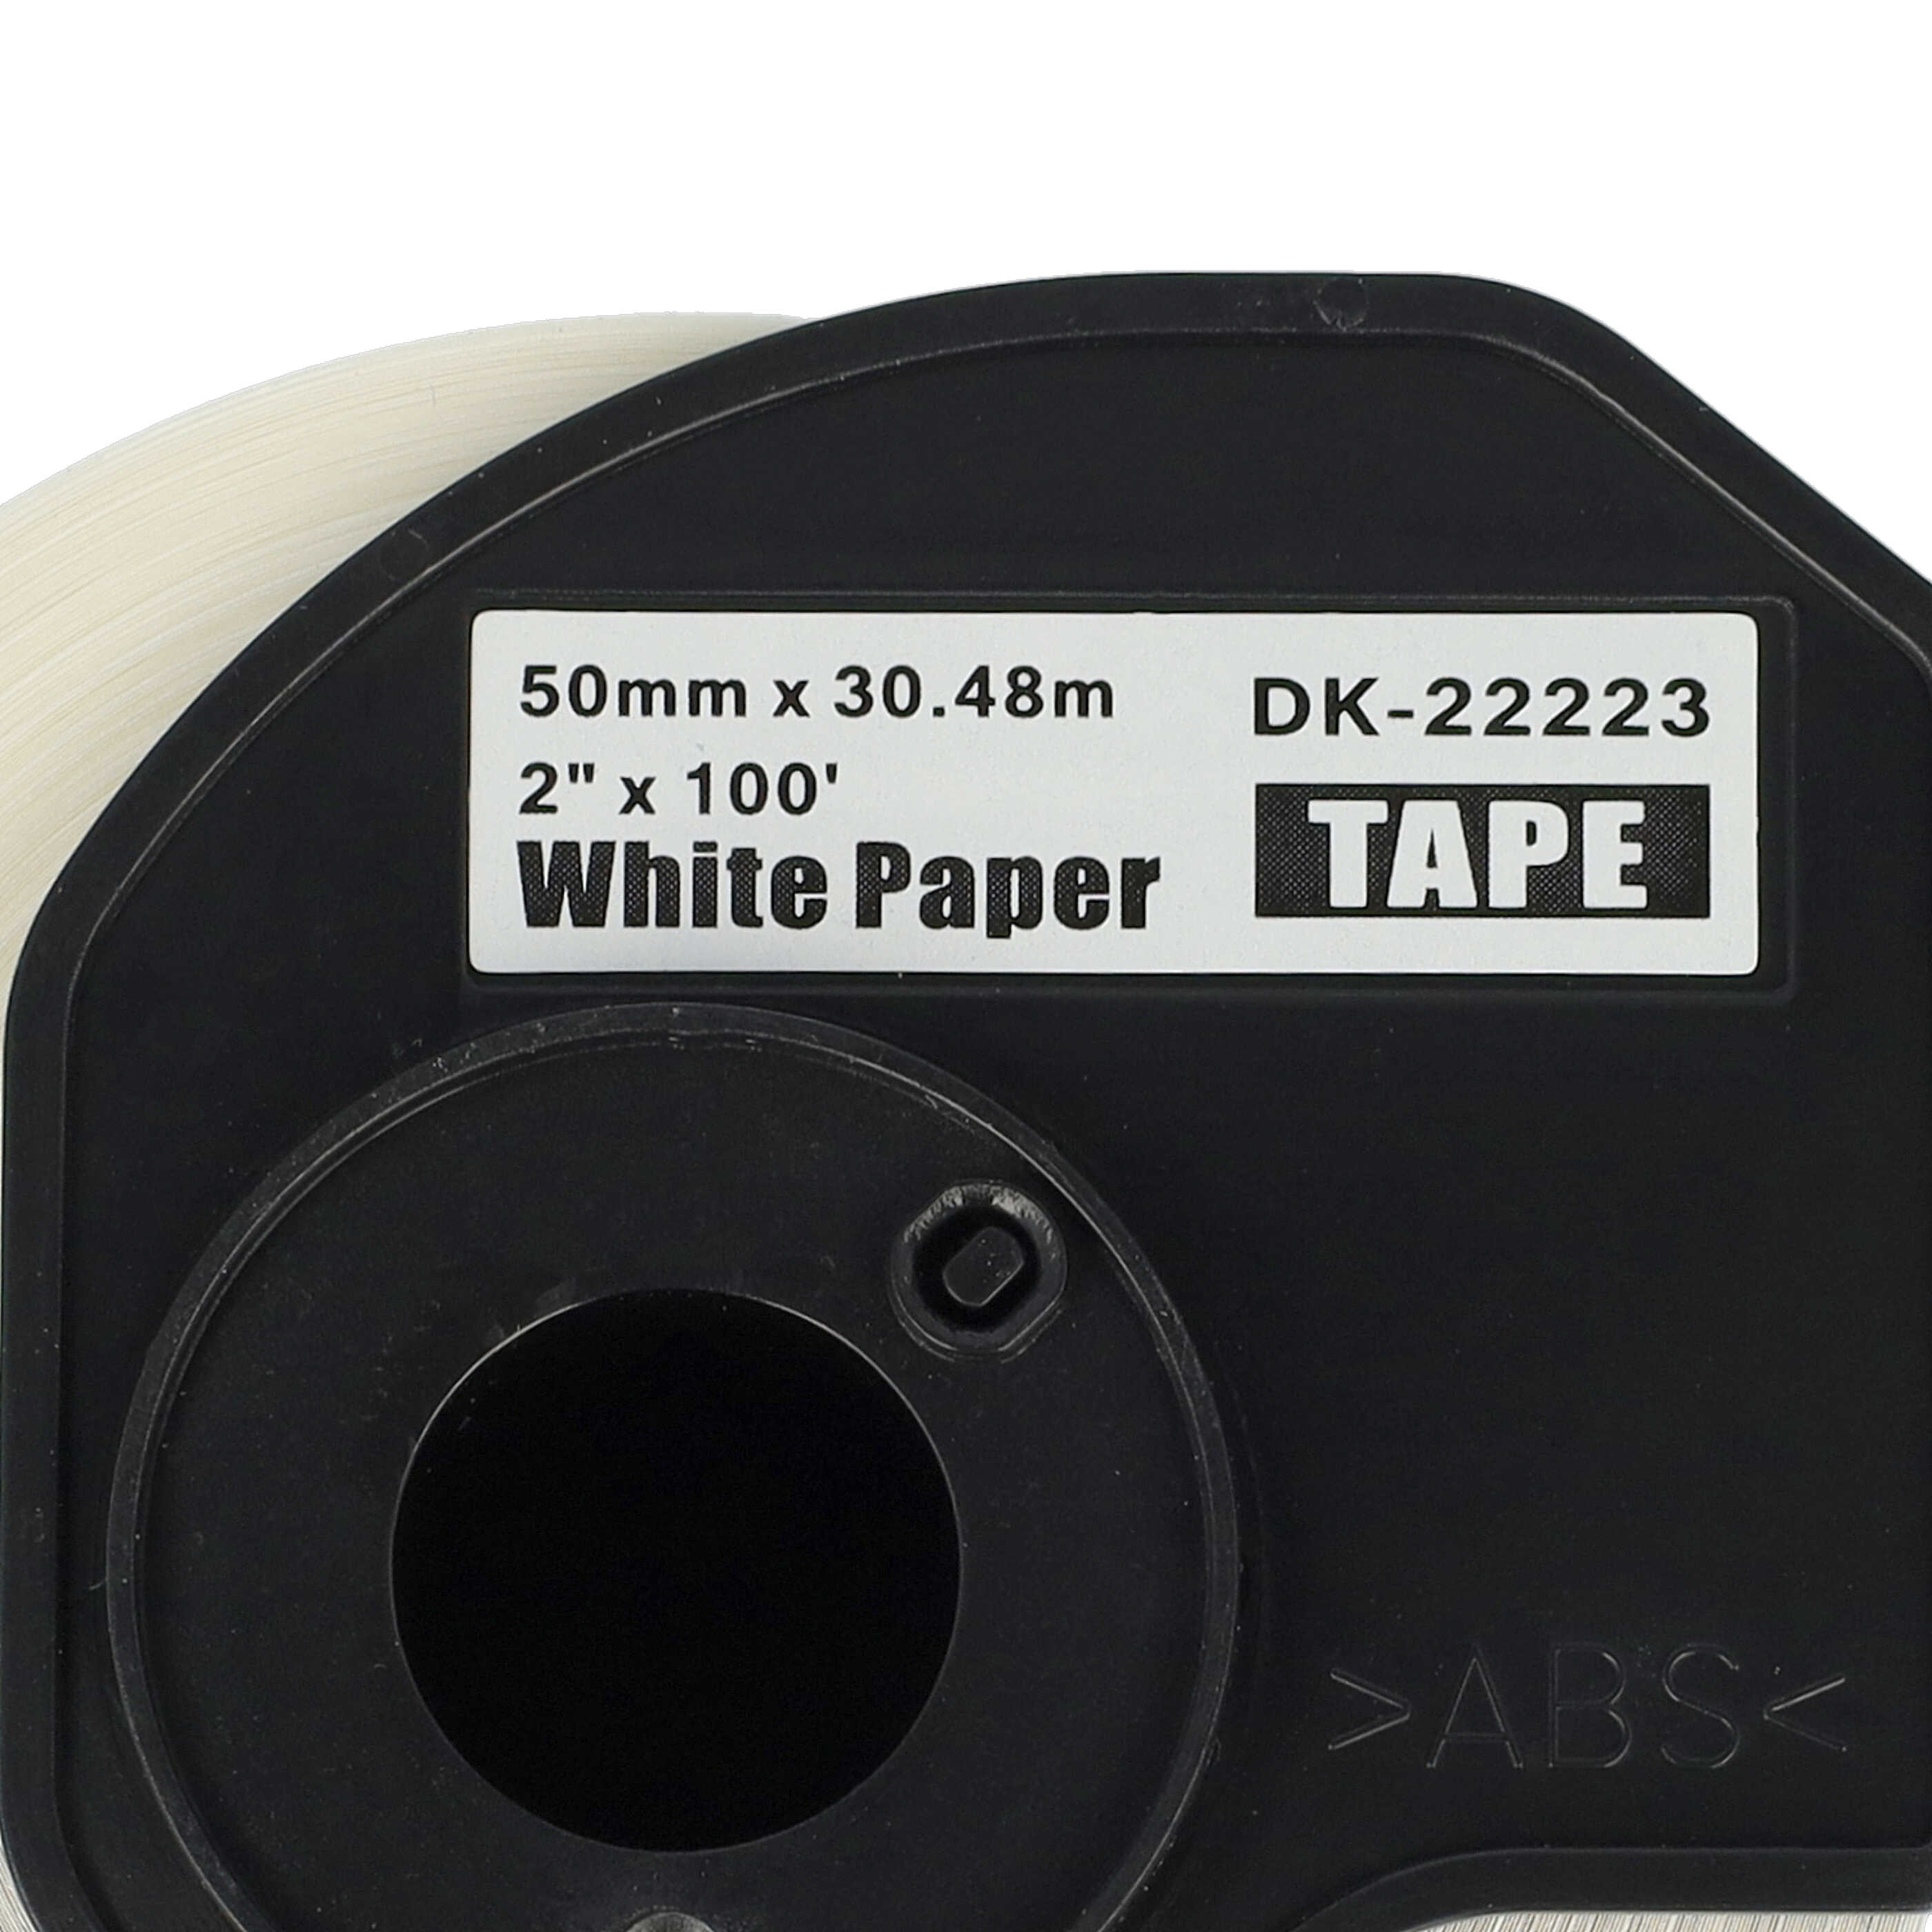 10x Labels replaces Brother DK-22223 for Labeller - Premium 50 mm x 30.48m + Holder